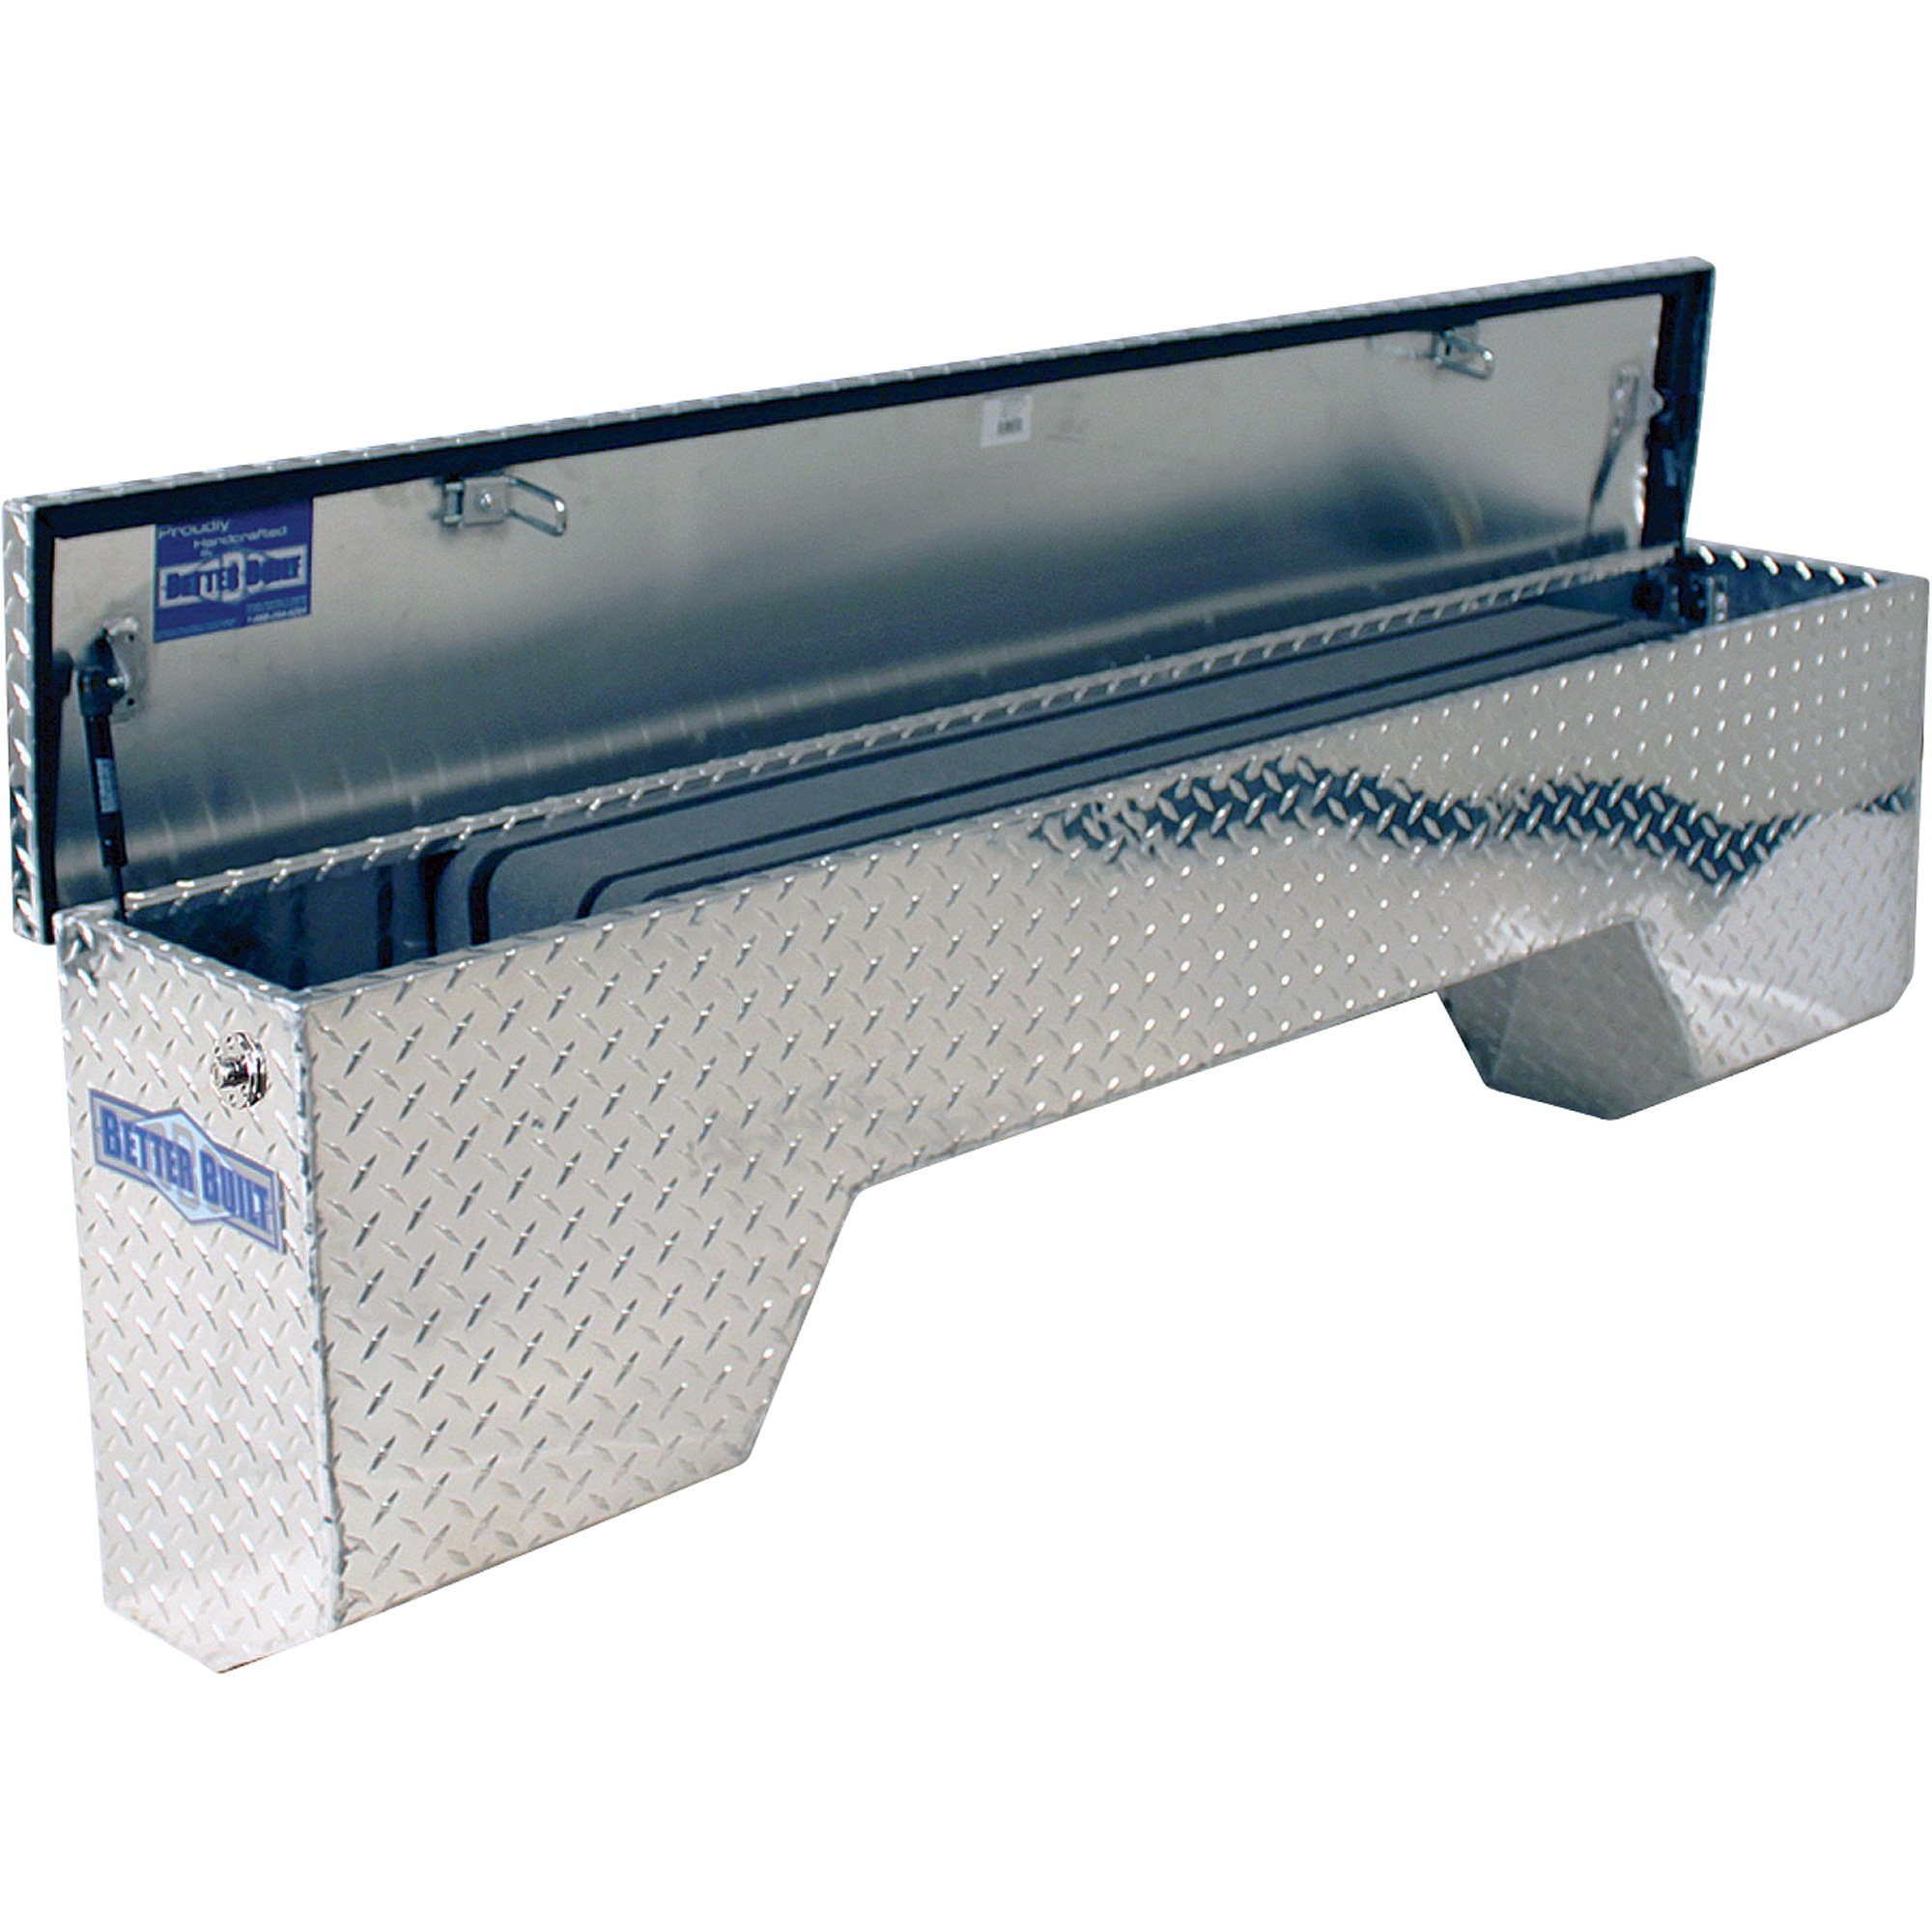 Wheel Well Tool Box with Drawers - Steel